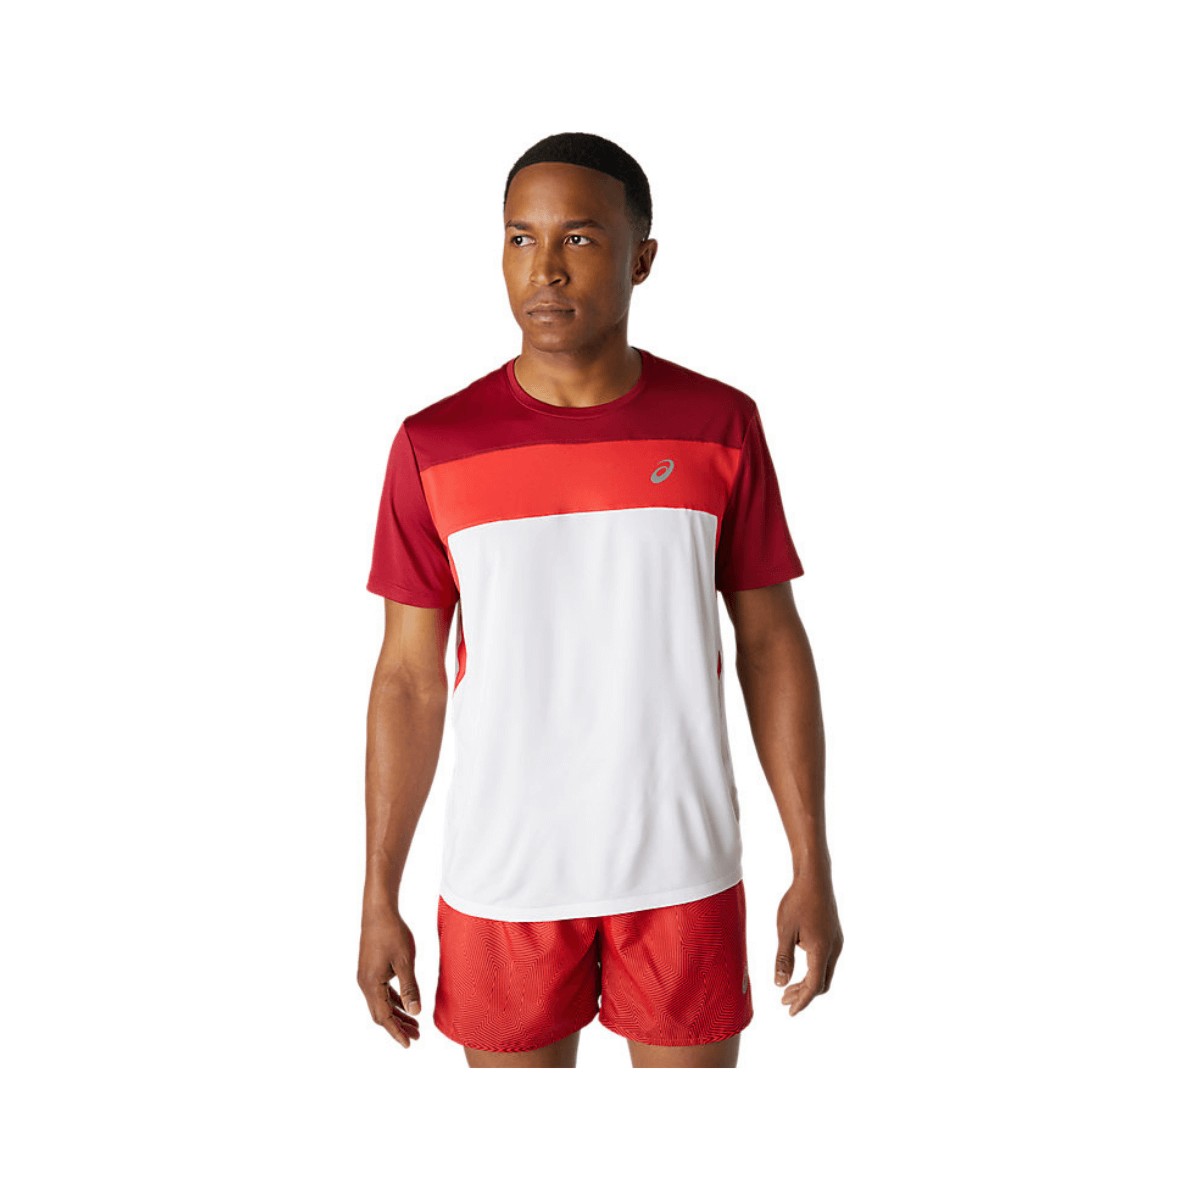 Asics Race SS T-Shirt Manches Courtes Grenat Rouge Blanc AW21, Taille XS